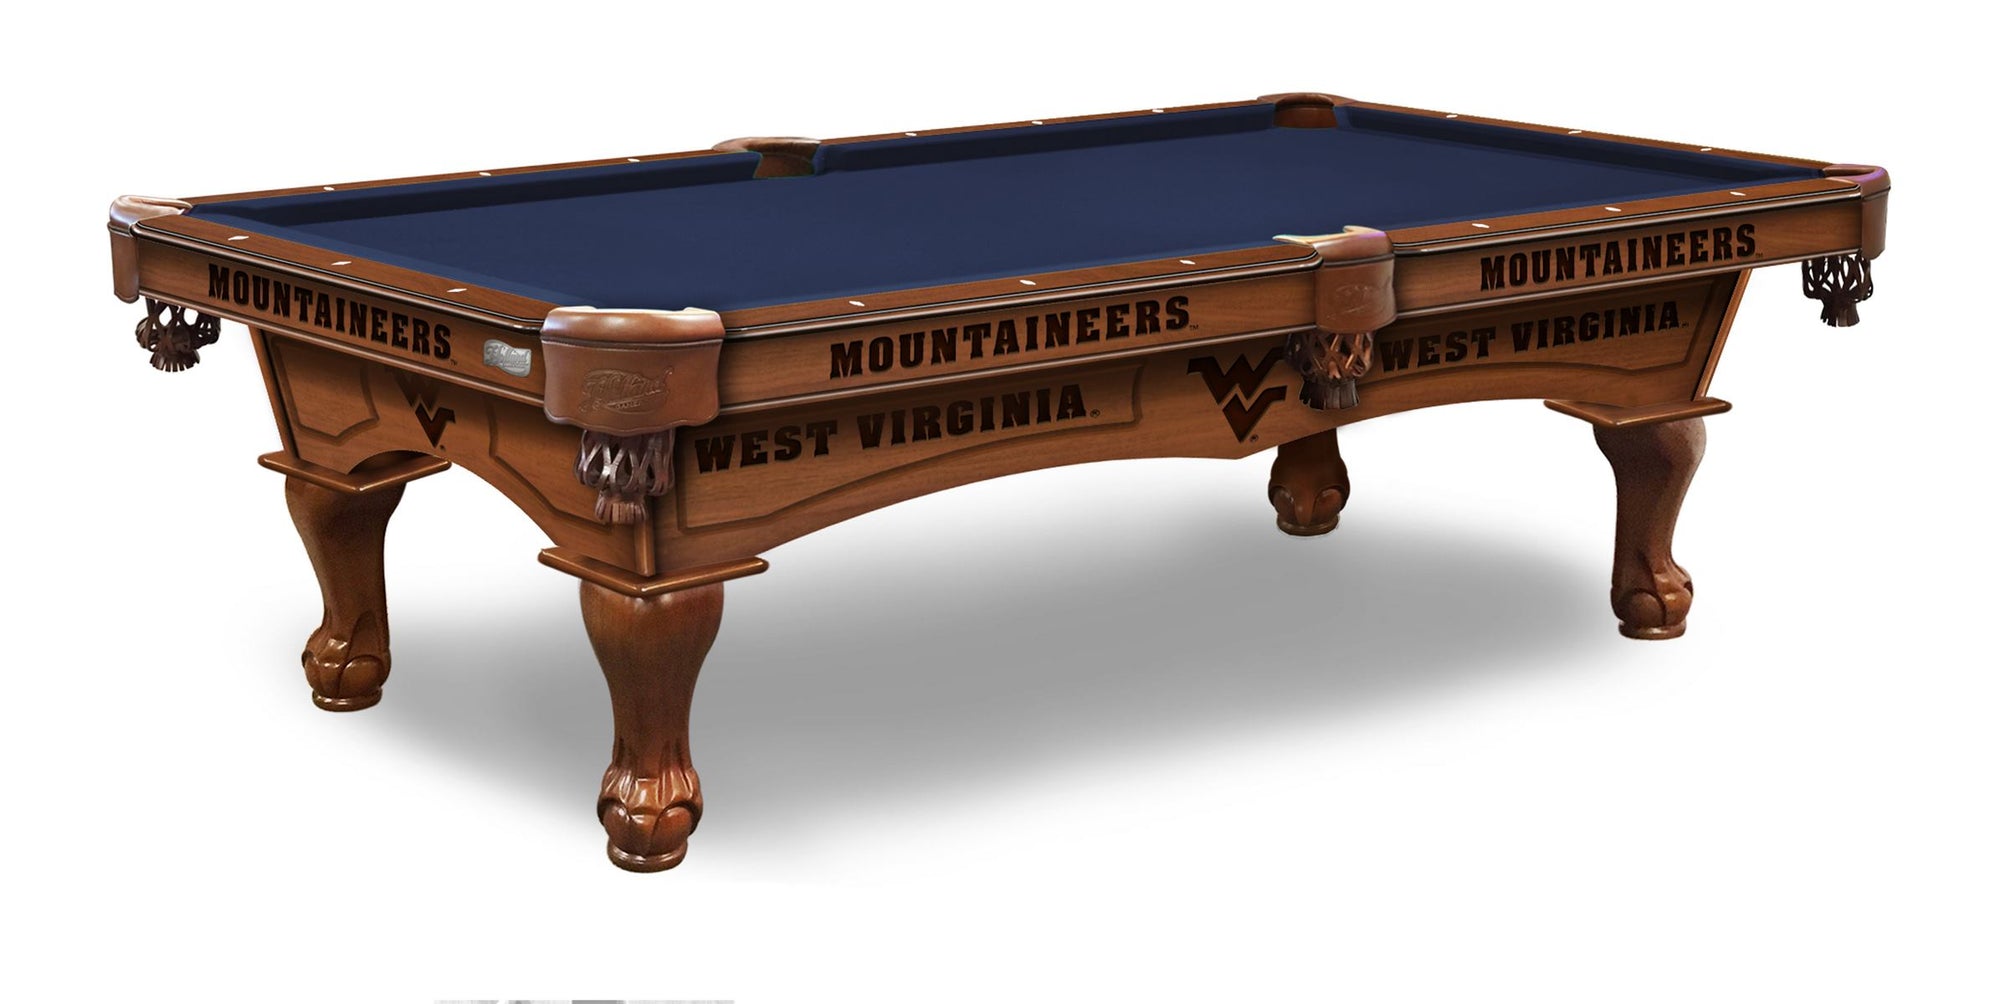 West Virginia University Pool Table with Plain Cloth